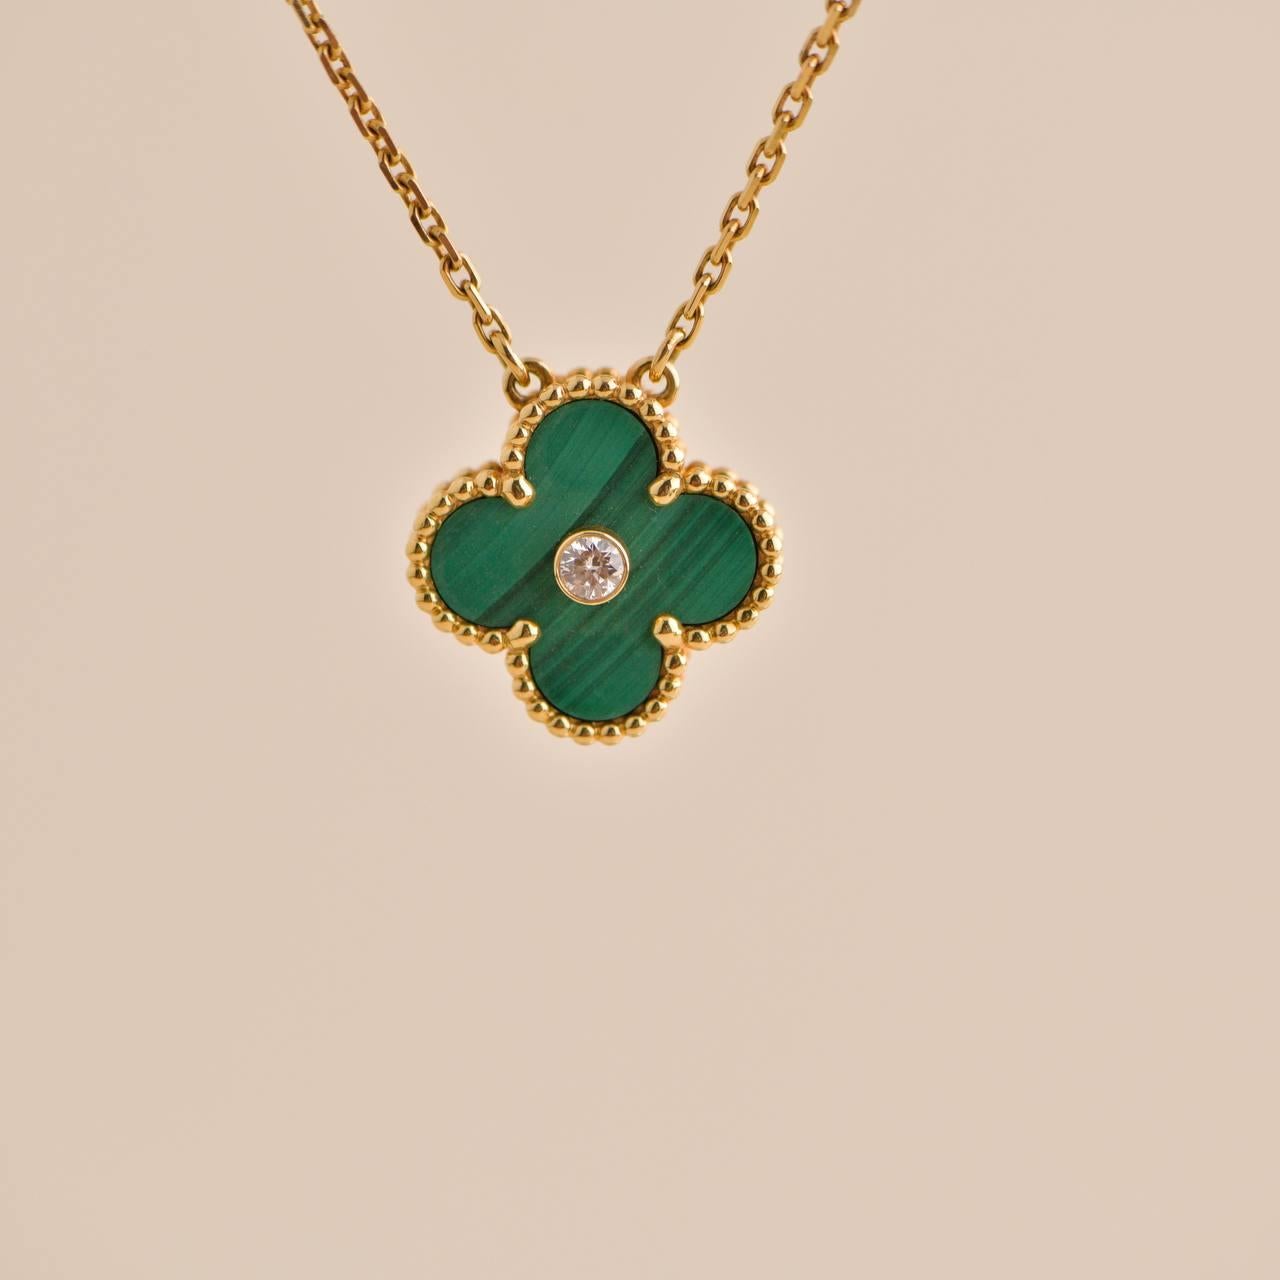 Gorgeous Limited edition released in 2013 Christmas as the holiday pendant.

Dandelion Antiques Code	AT-2195
Brand	                                Van Cleef & Arpels
Model	                                ARO49S00
Serial No	                          